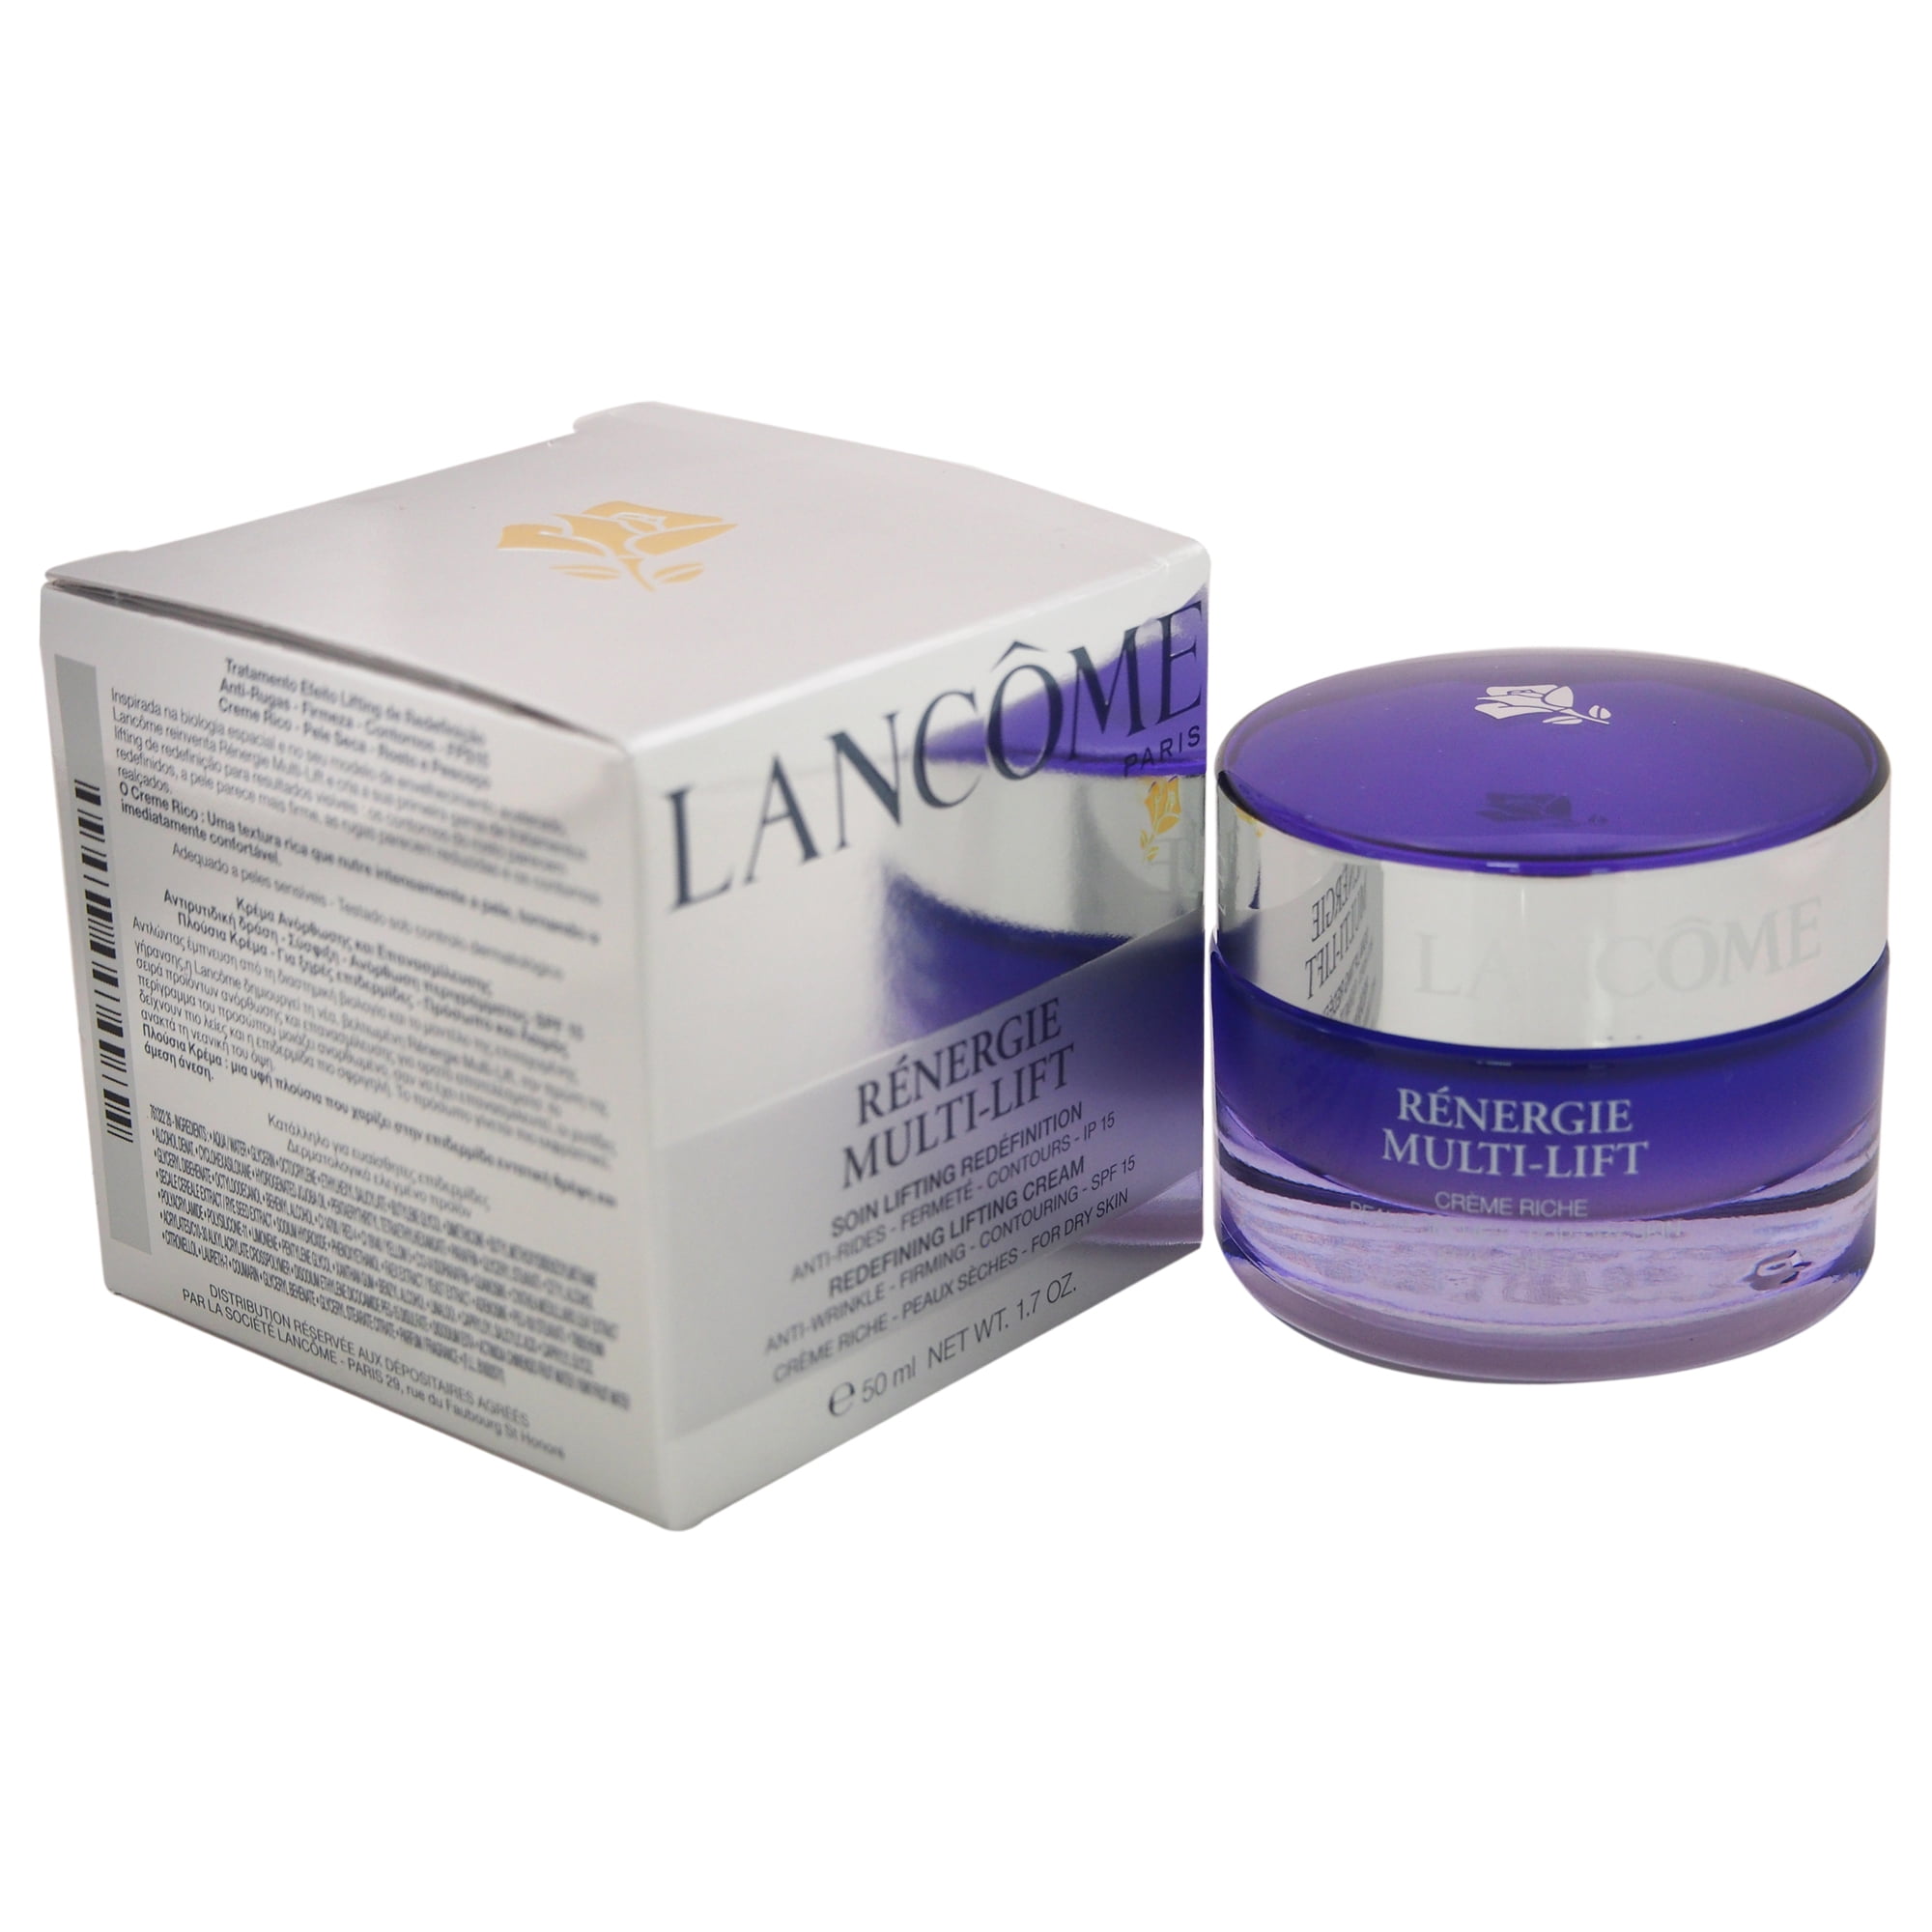 Dry - 1.7 Lifting SPF Redefining by Renergie Multi-Lift Types Skin 15 Lancome for Unisex Cream Cream oz -